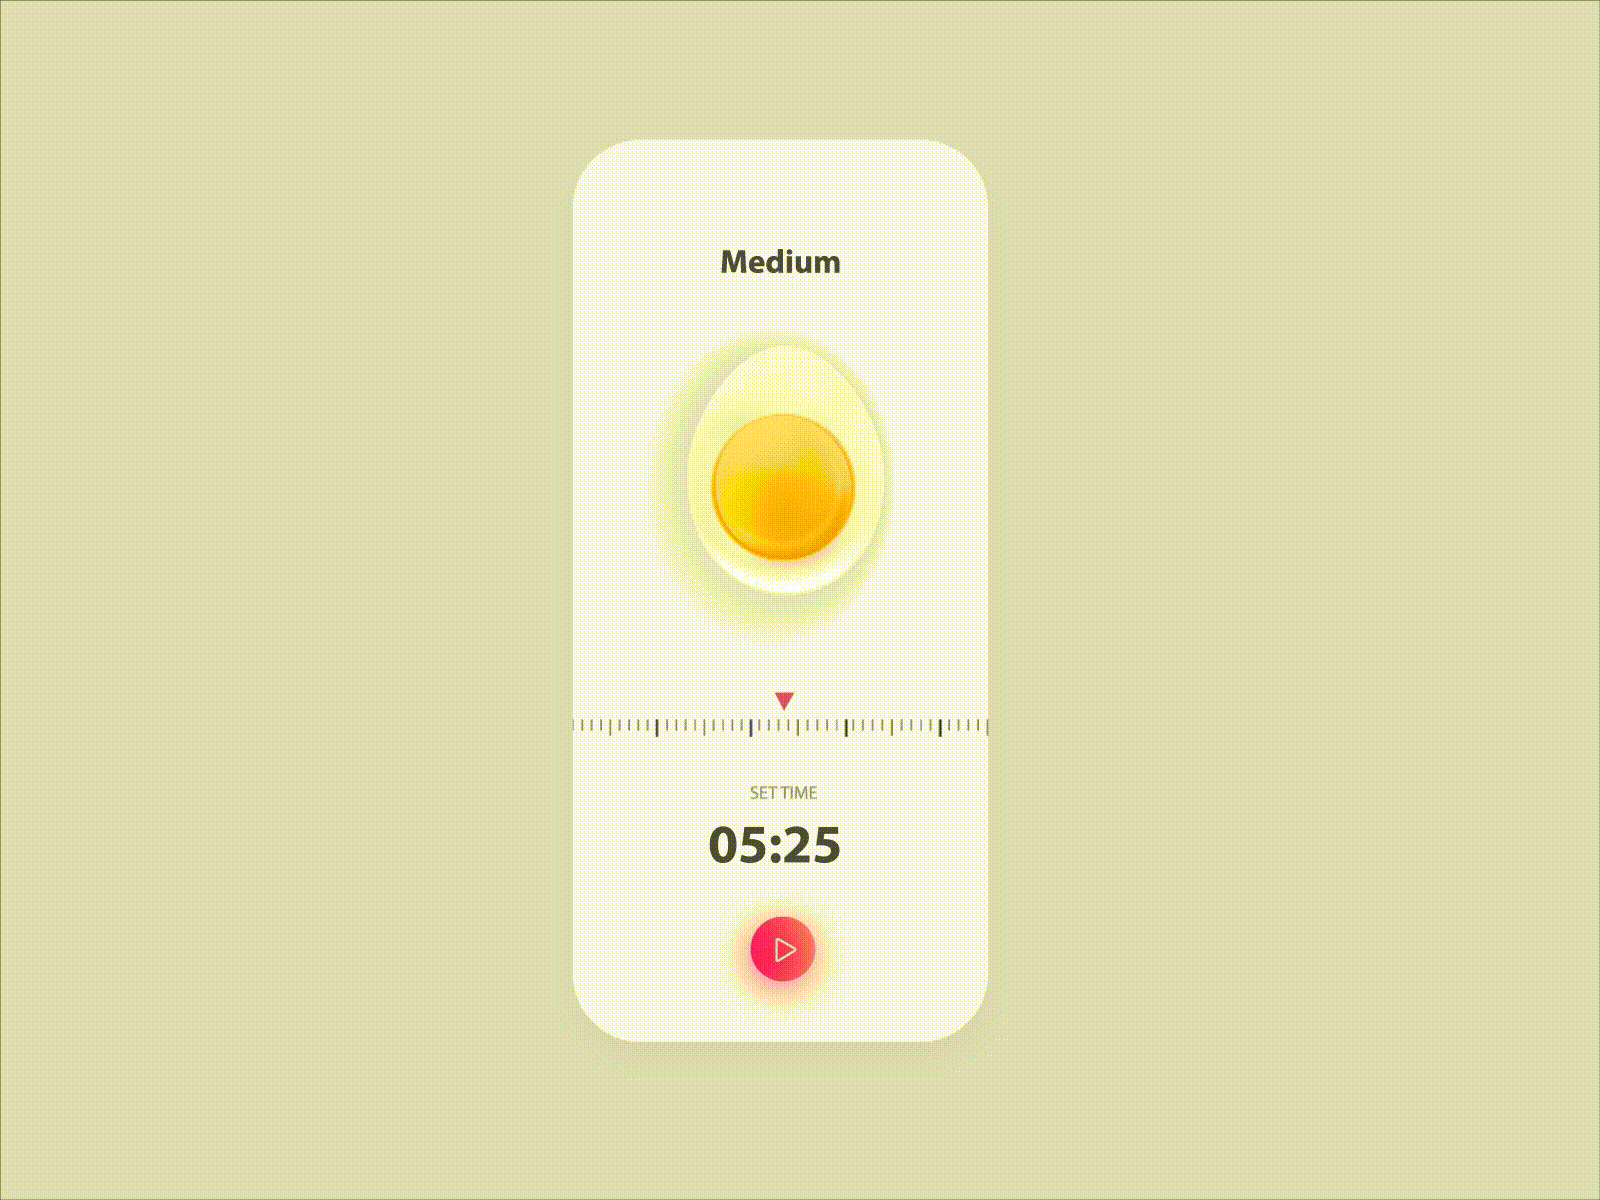 Egg Timer 2d 3d aftereffects animation app design dribbble egg hello interaction interface minimal timer xd design